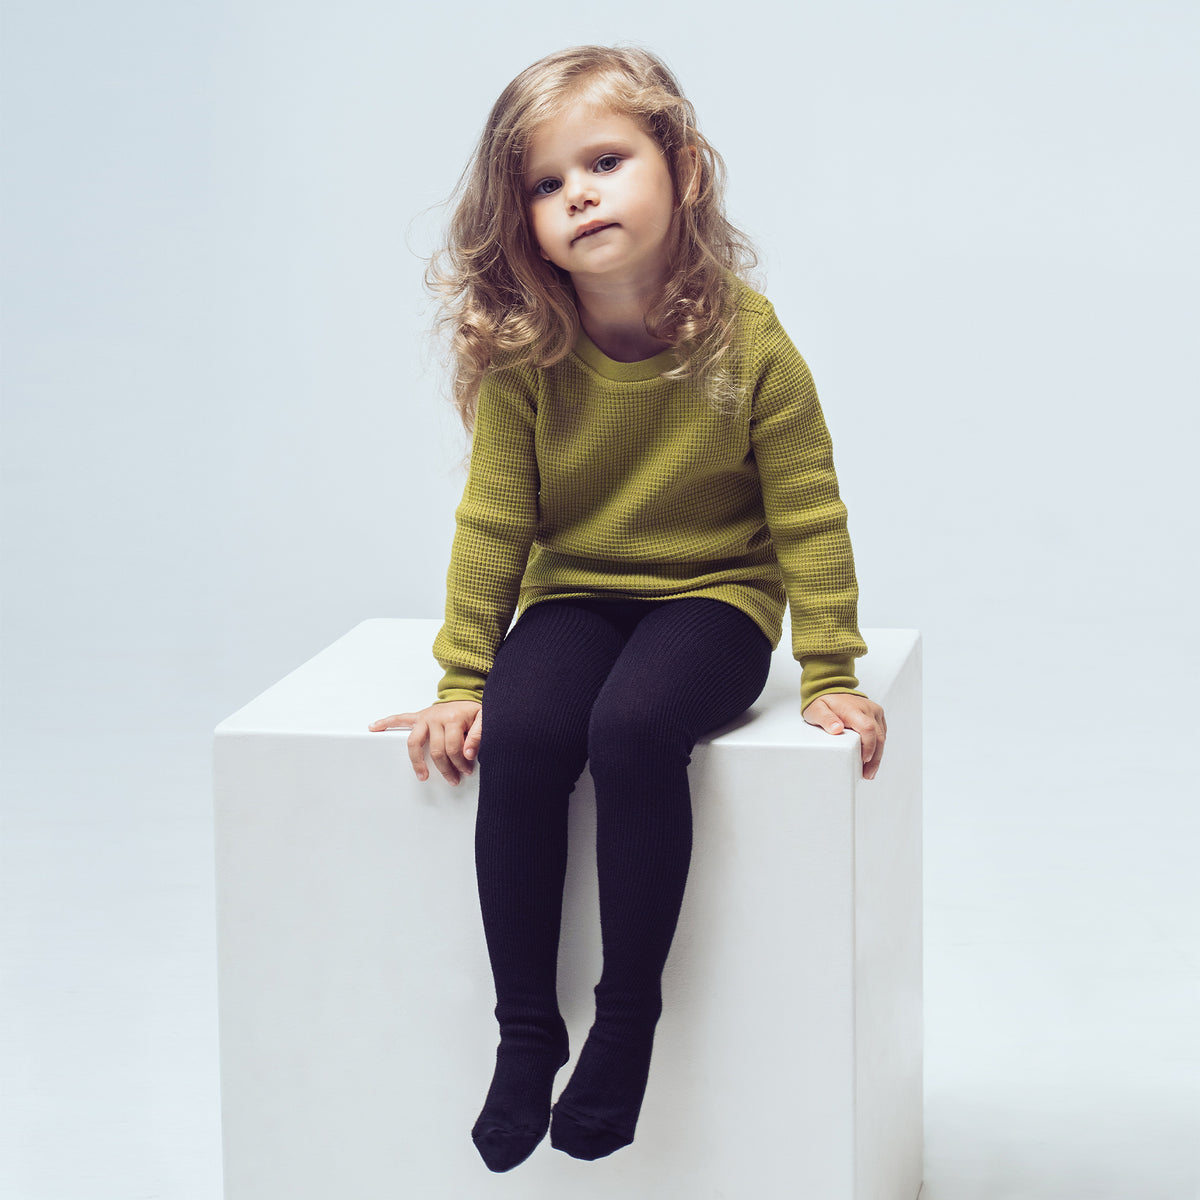 PEQNE Footed Children Tights in Carbon Black